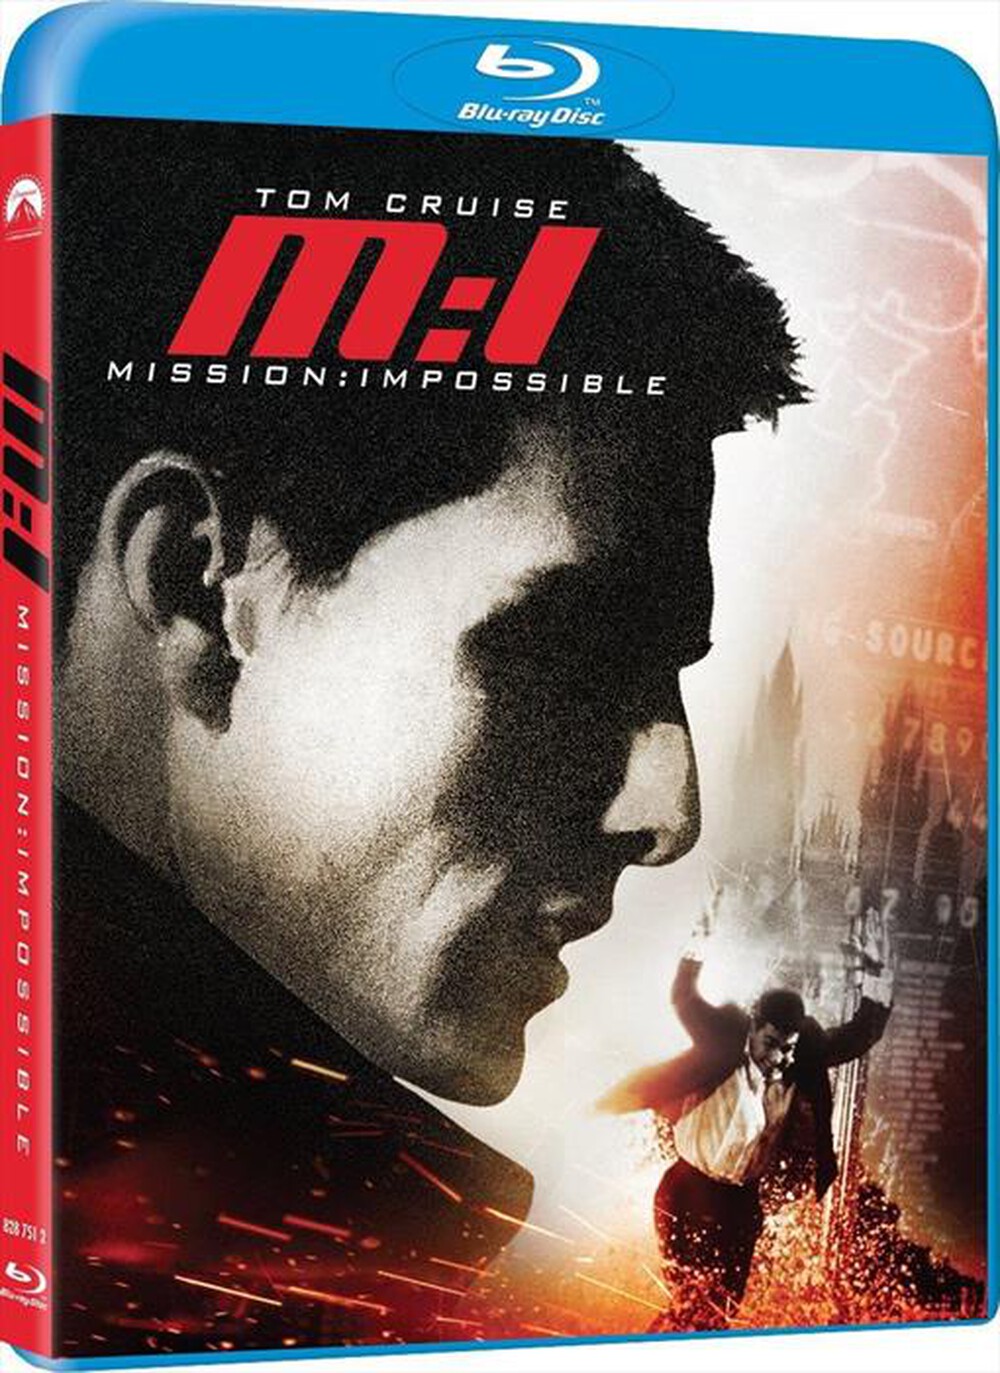 "UNIVERSAL PICTURES - Mission Impossible"